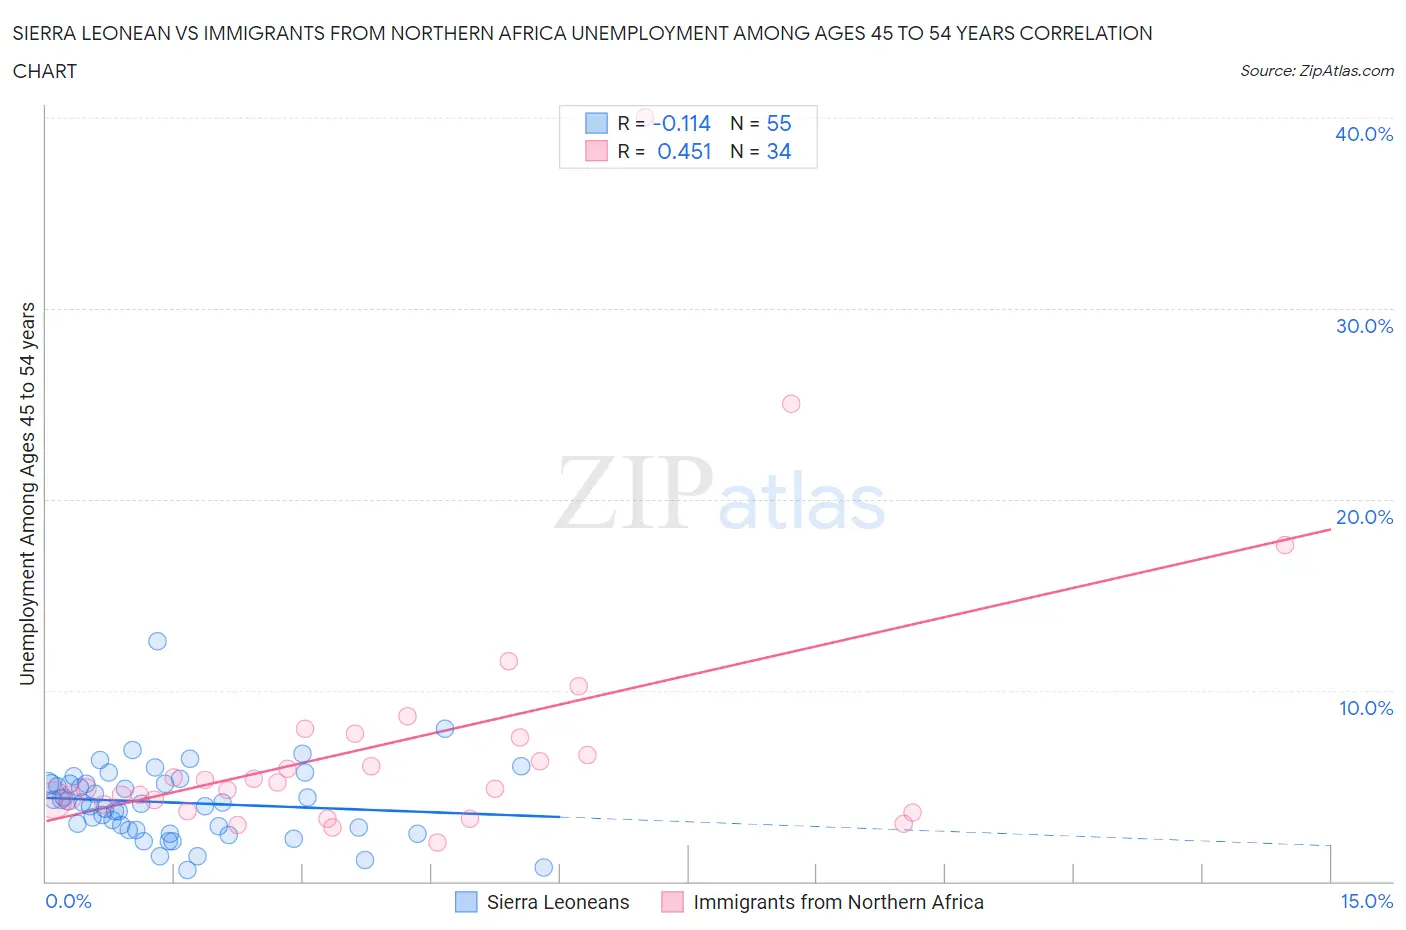 Sierra Leonean vs Immigrants from Northern Africa Unemployment Among Ages 45 to 54 years